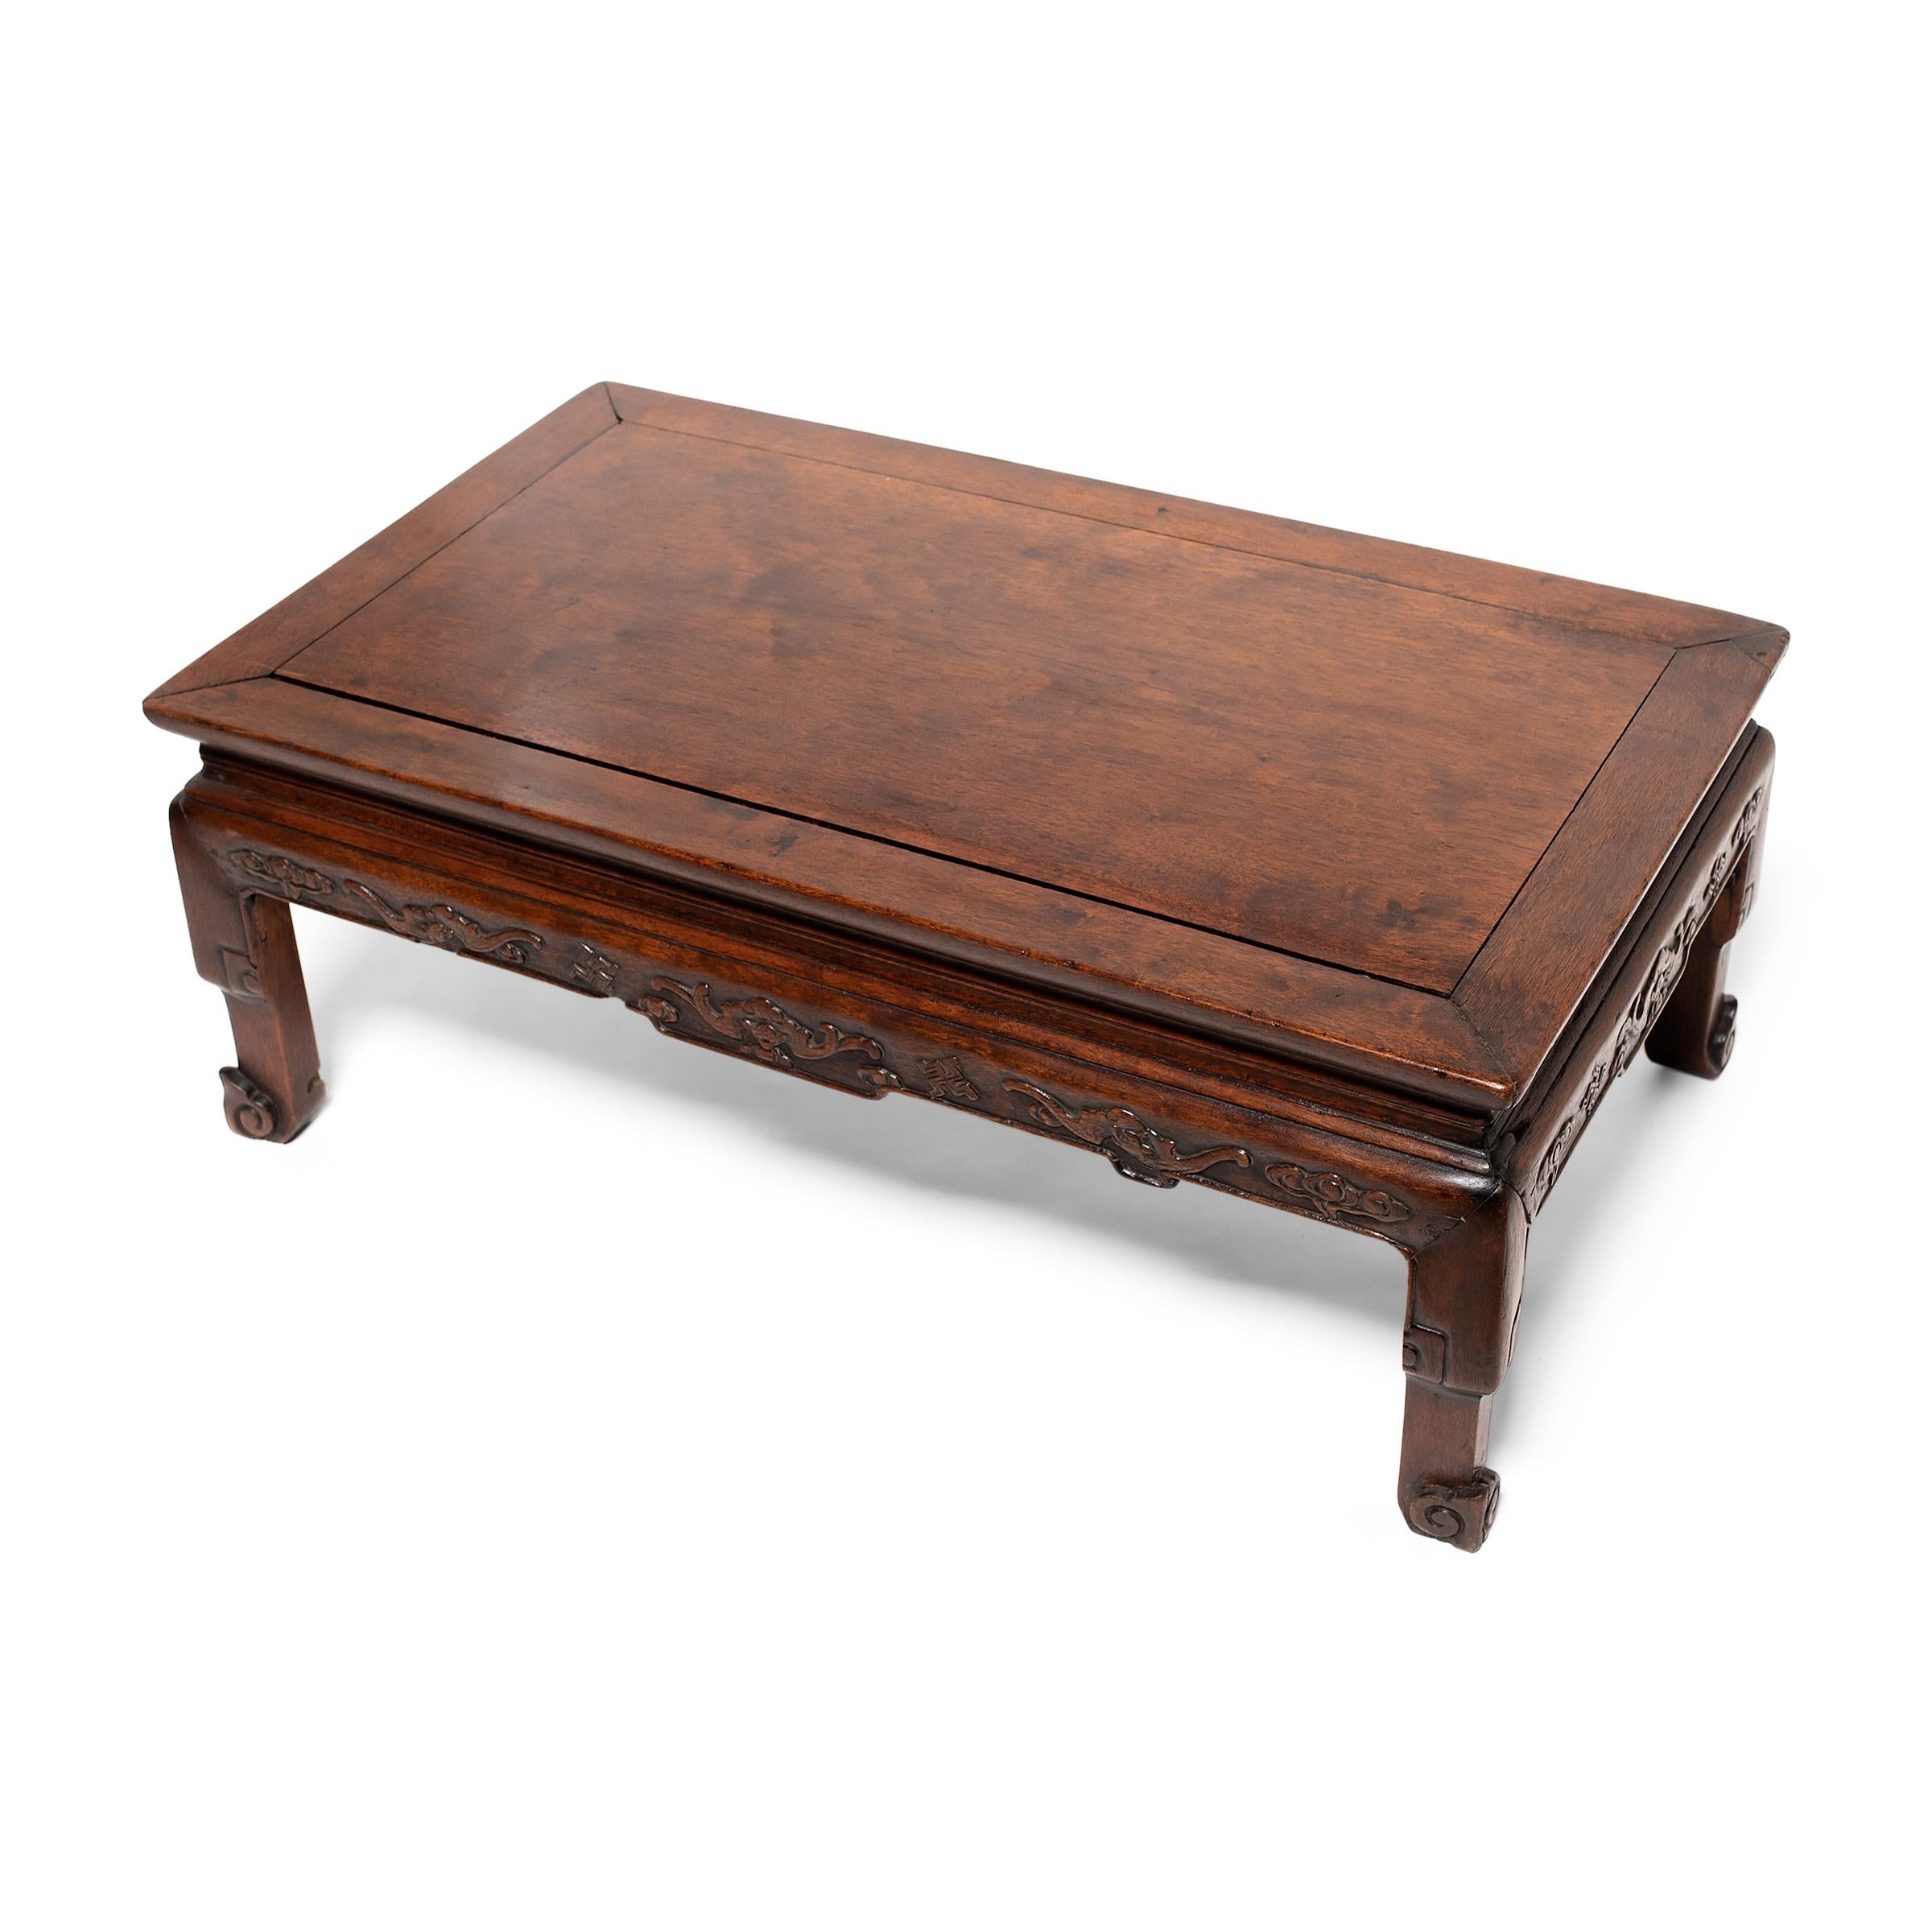 Chinois Table basse chinoise Kang, vers 1850 en vente